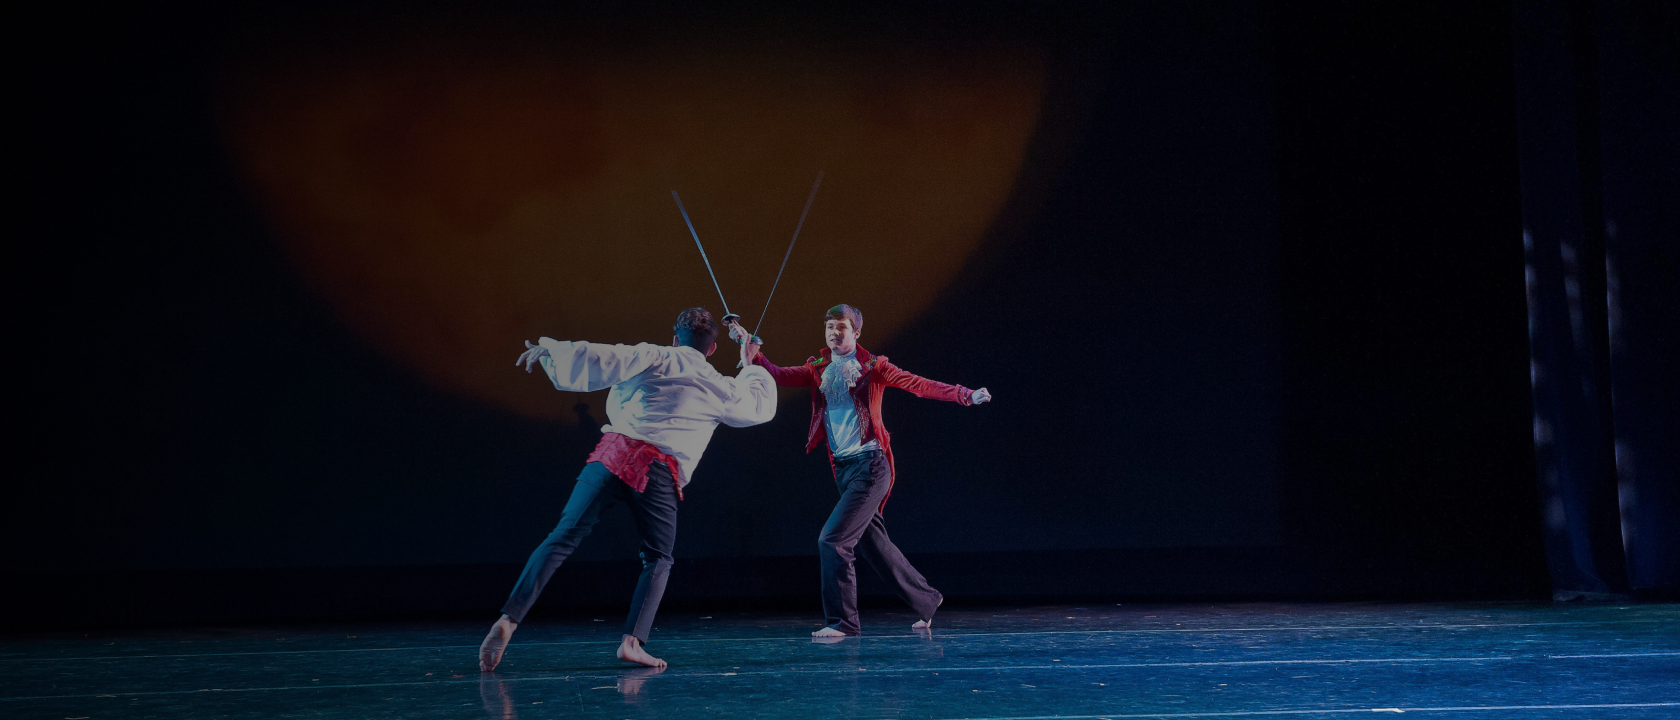 Two students sword fighting on stage